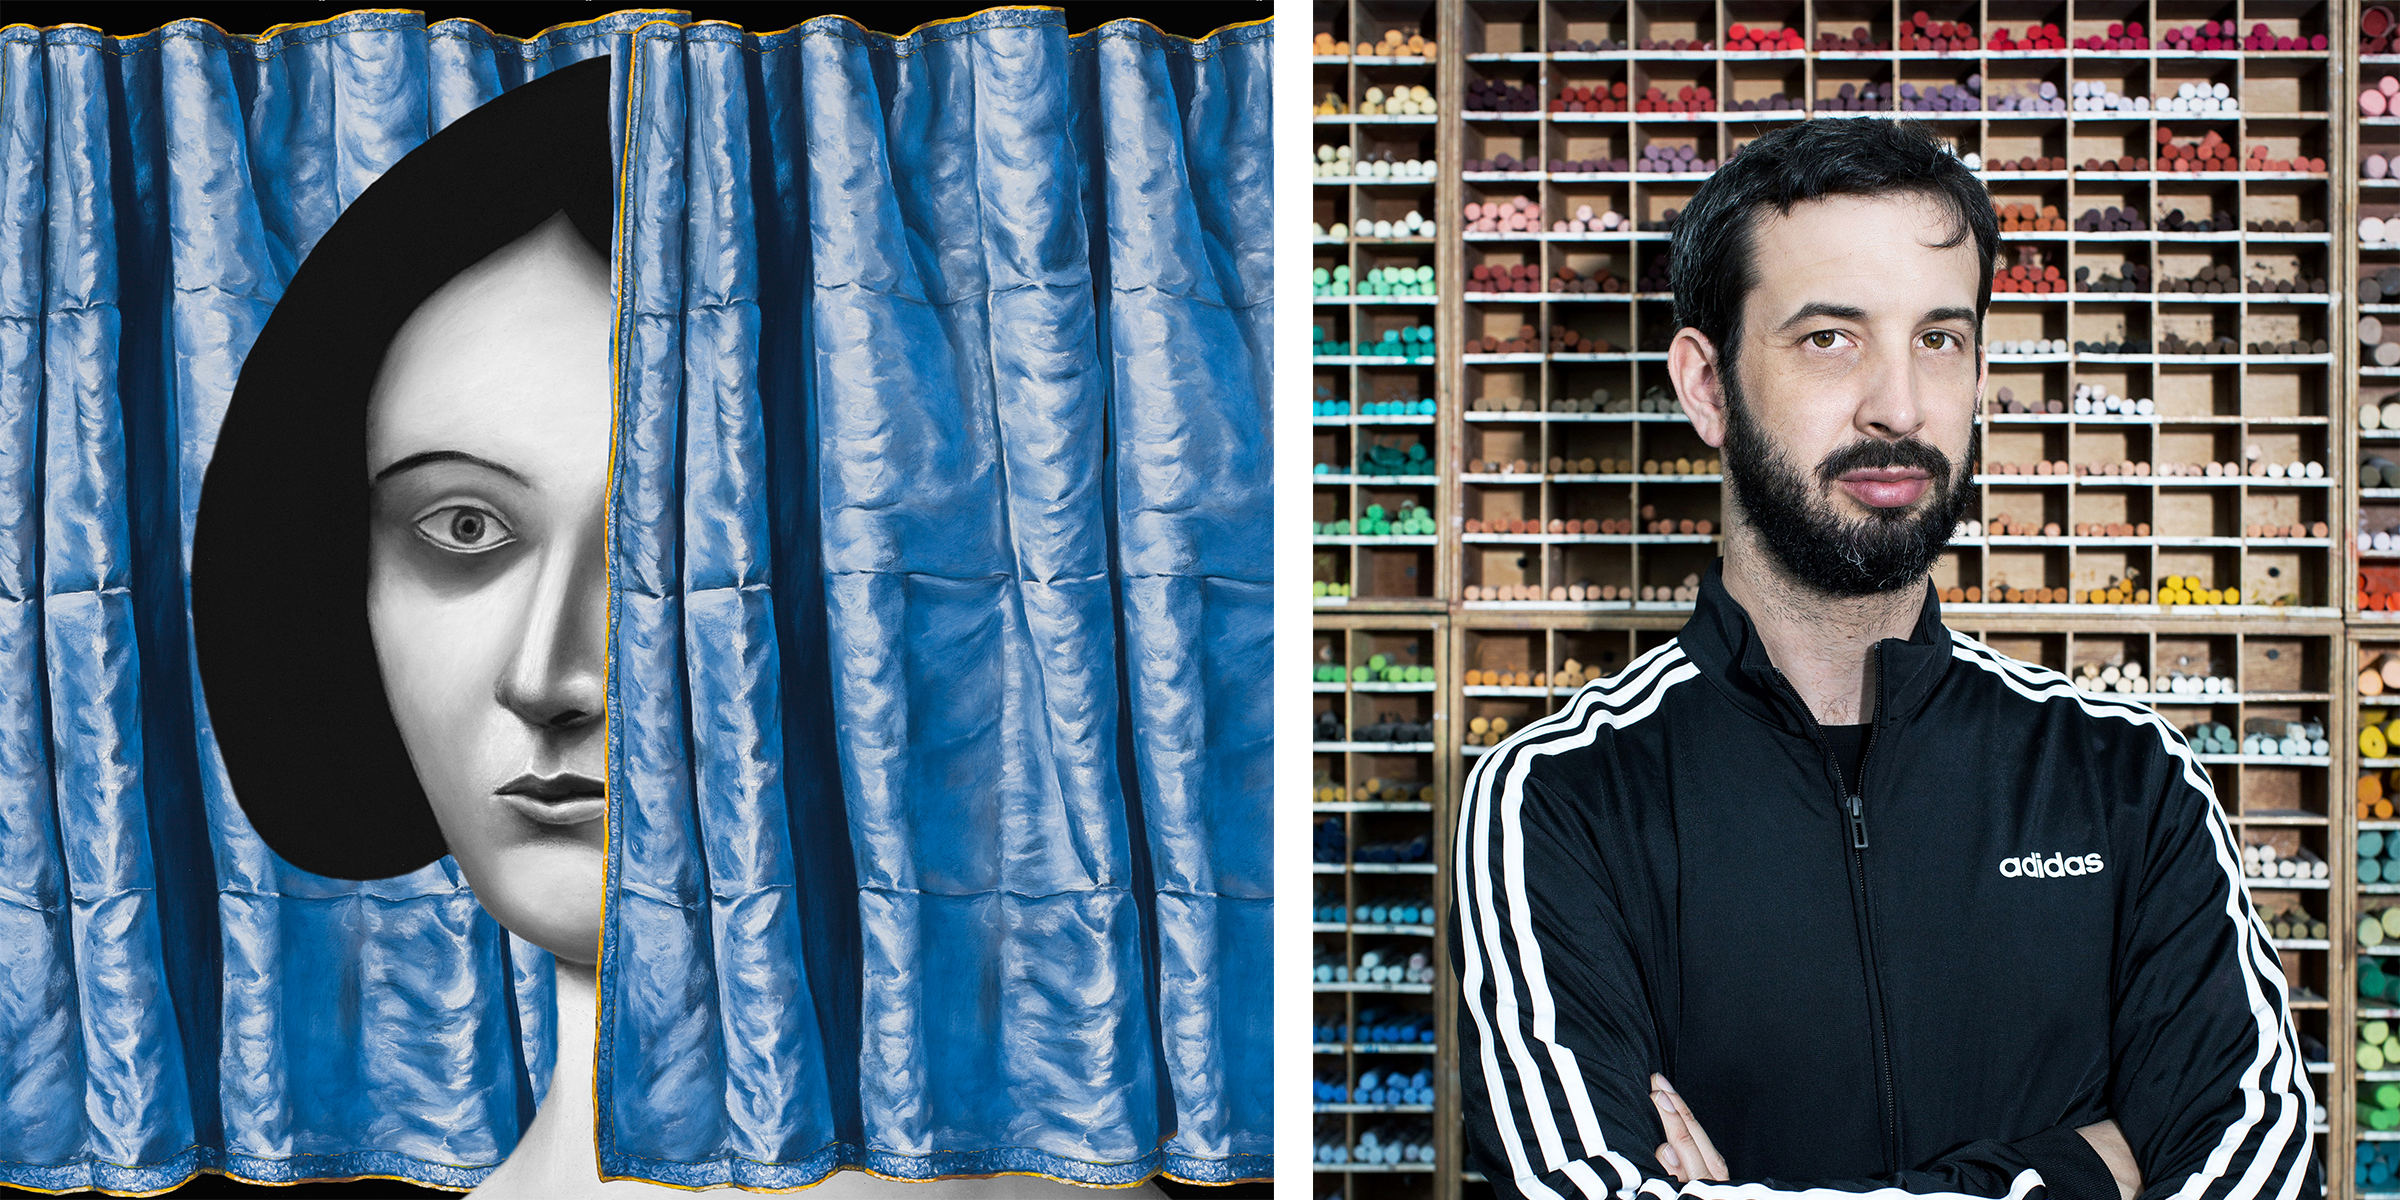 Left image: Detail of a painting. A woman's face peeks out behind a blue curtain. Right image: Portrait of Nicolas Party in front of a wall of stored pastels.